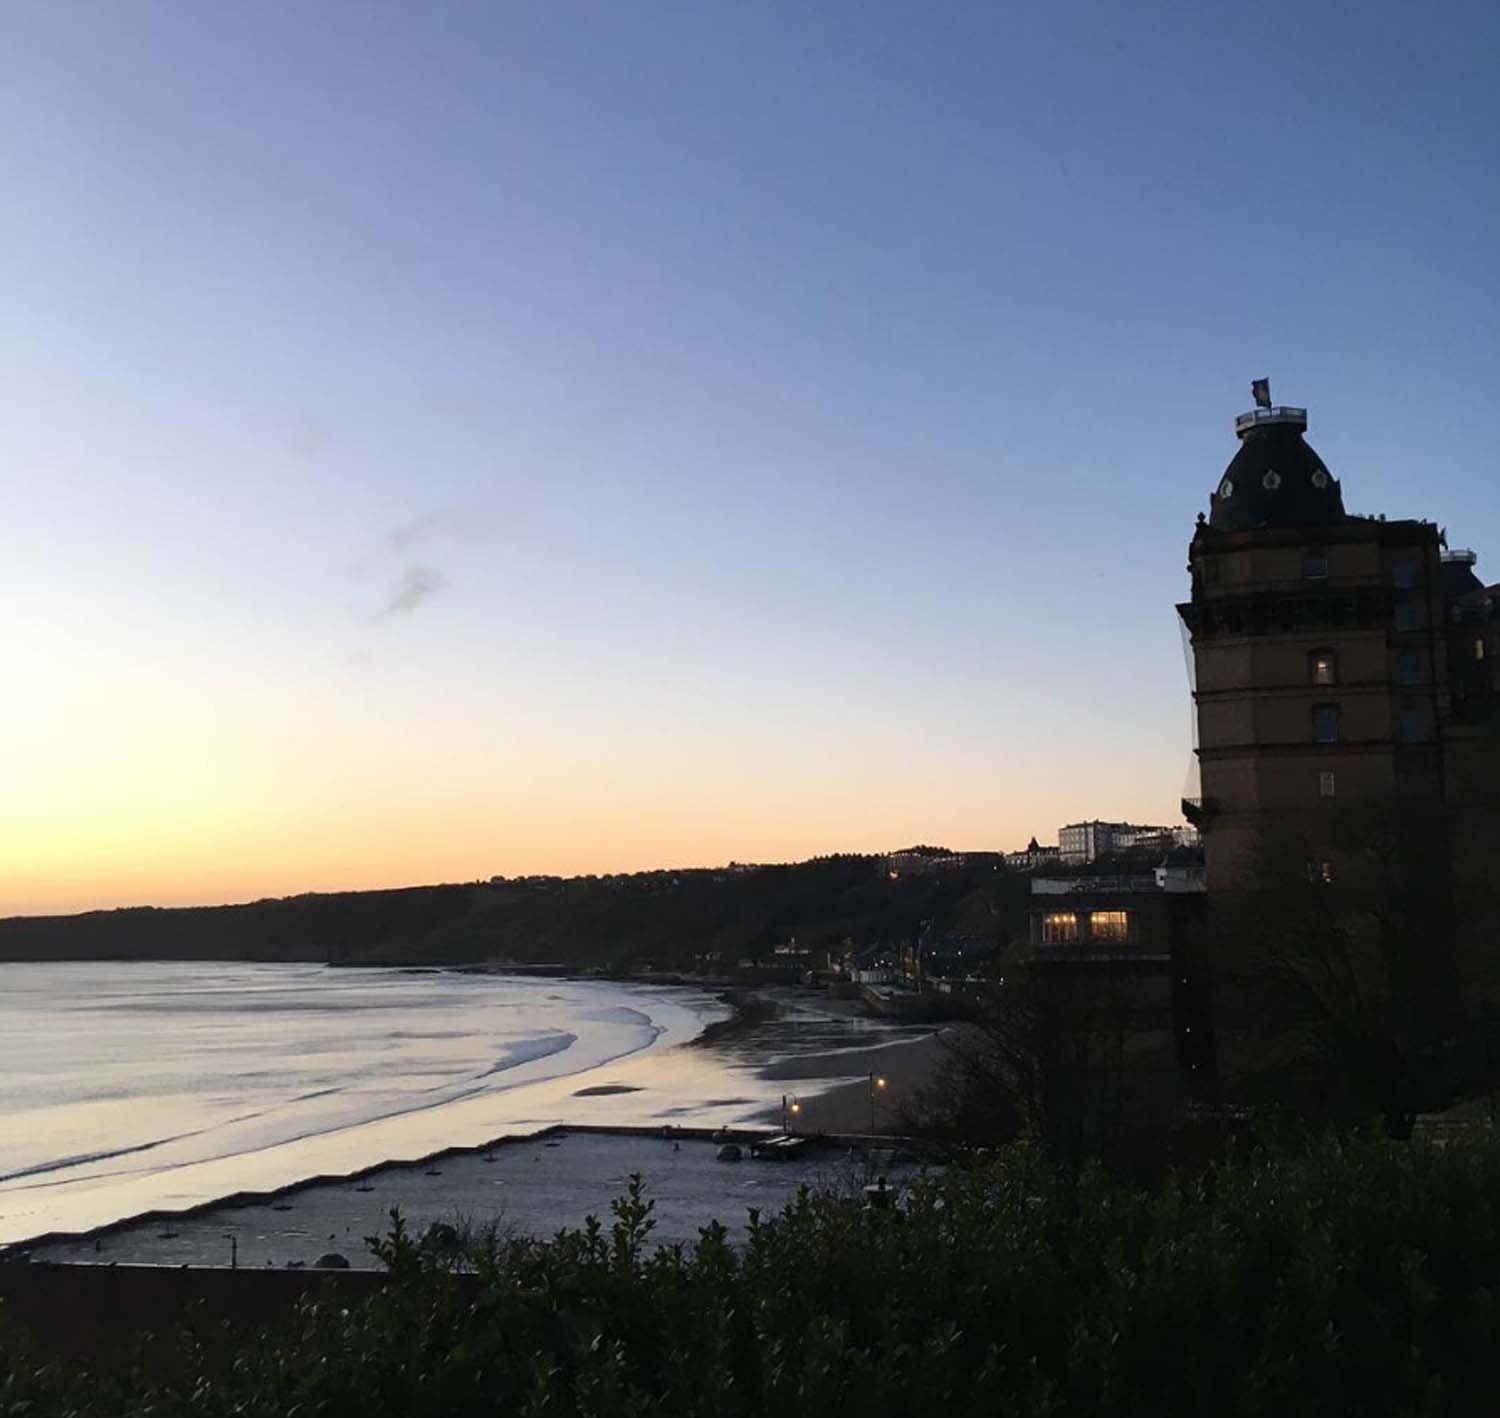 Looking across the bay towards Filey one morning with a silhouette of Scarborough’s Grand Hotel in the foreground